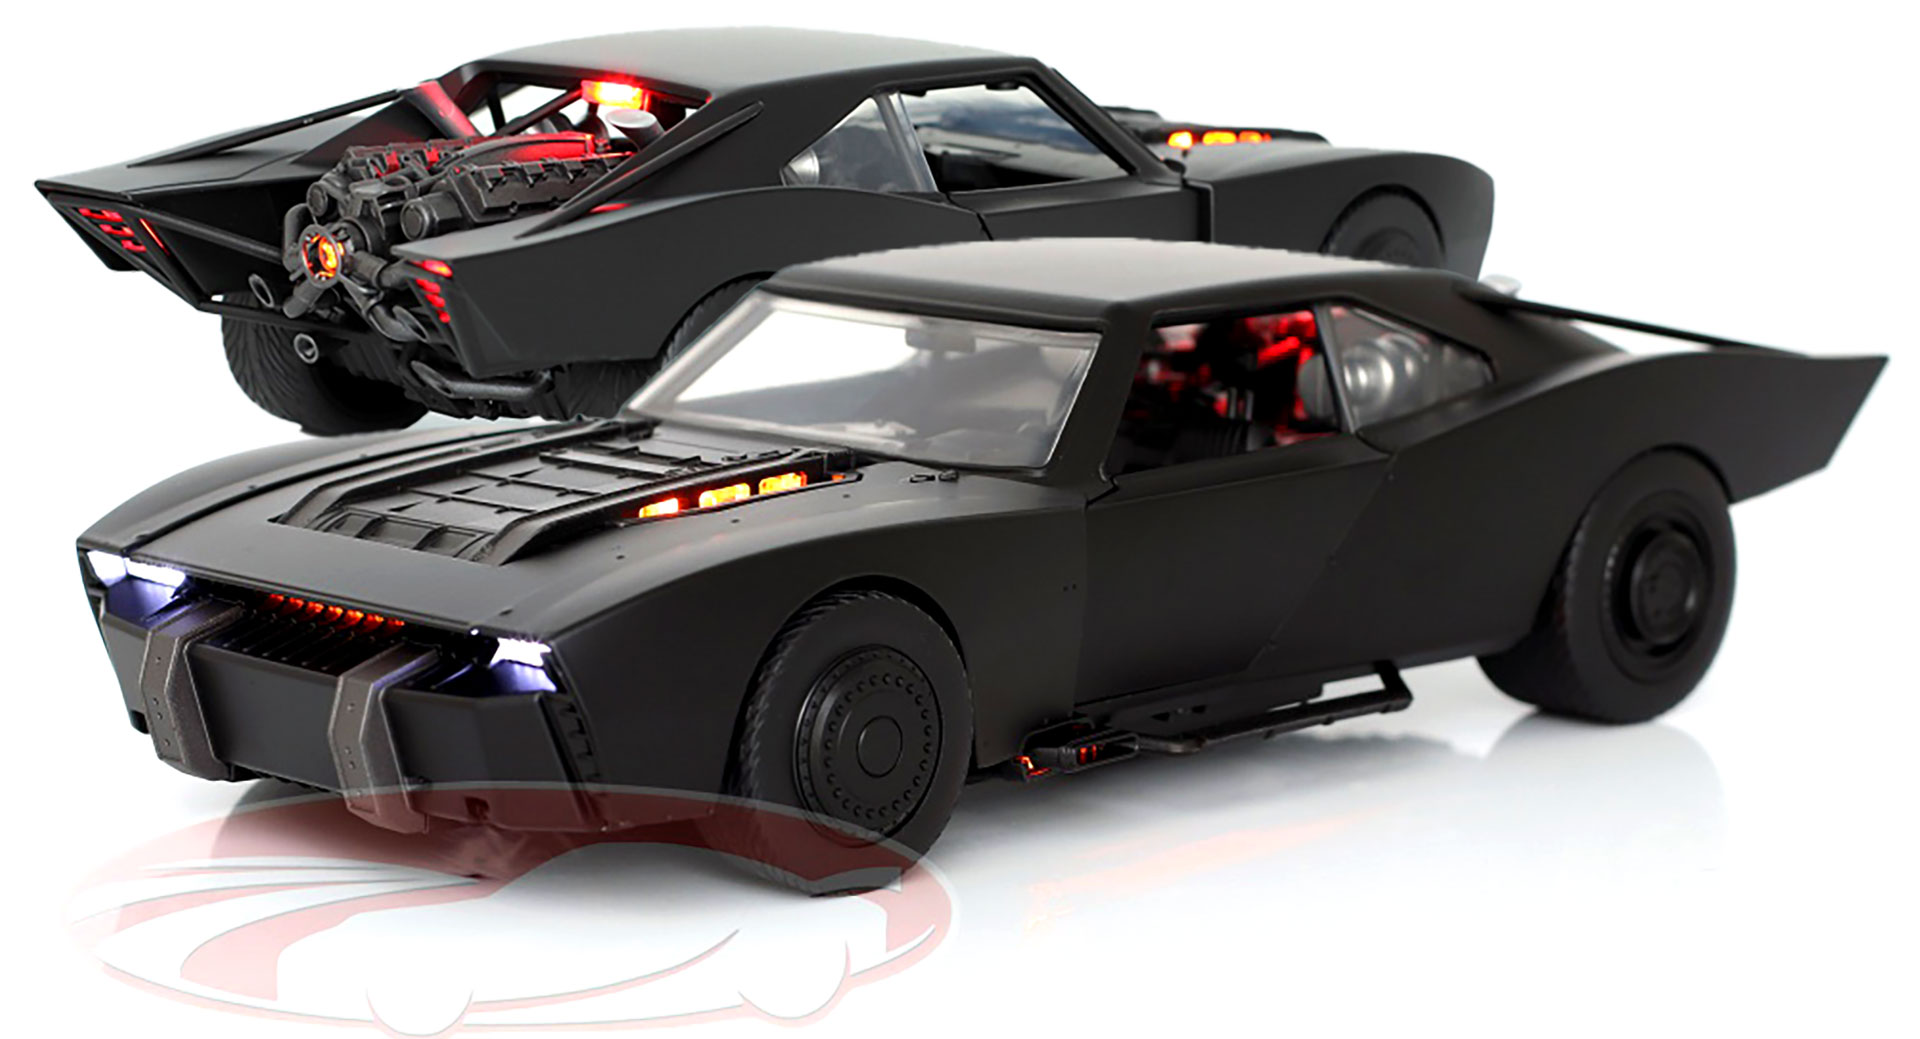 New Batmobile Toy For 'The Batman' Movie Shows Off Details Of The